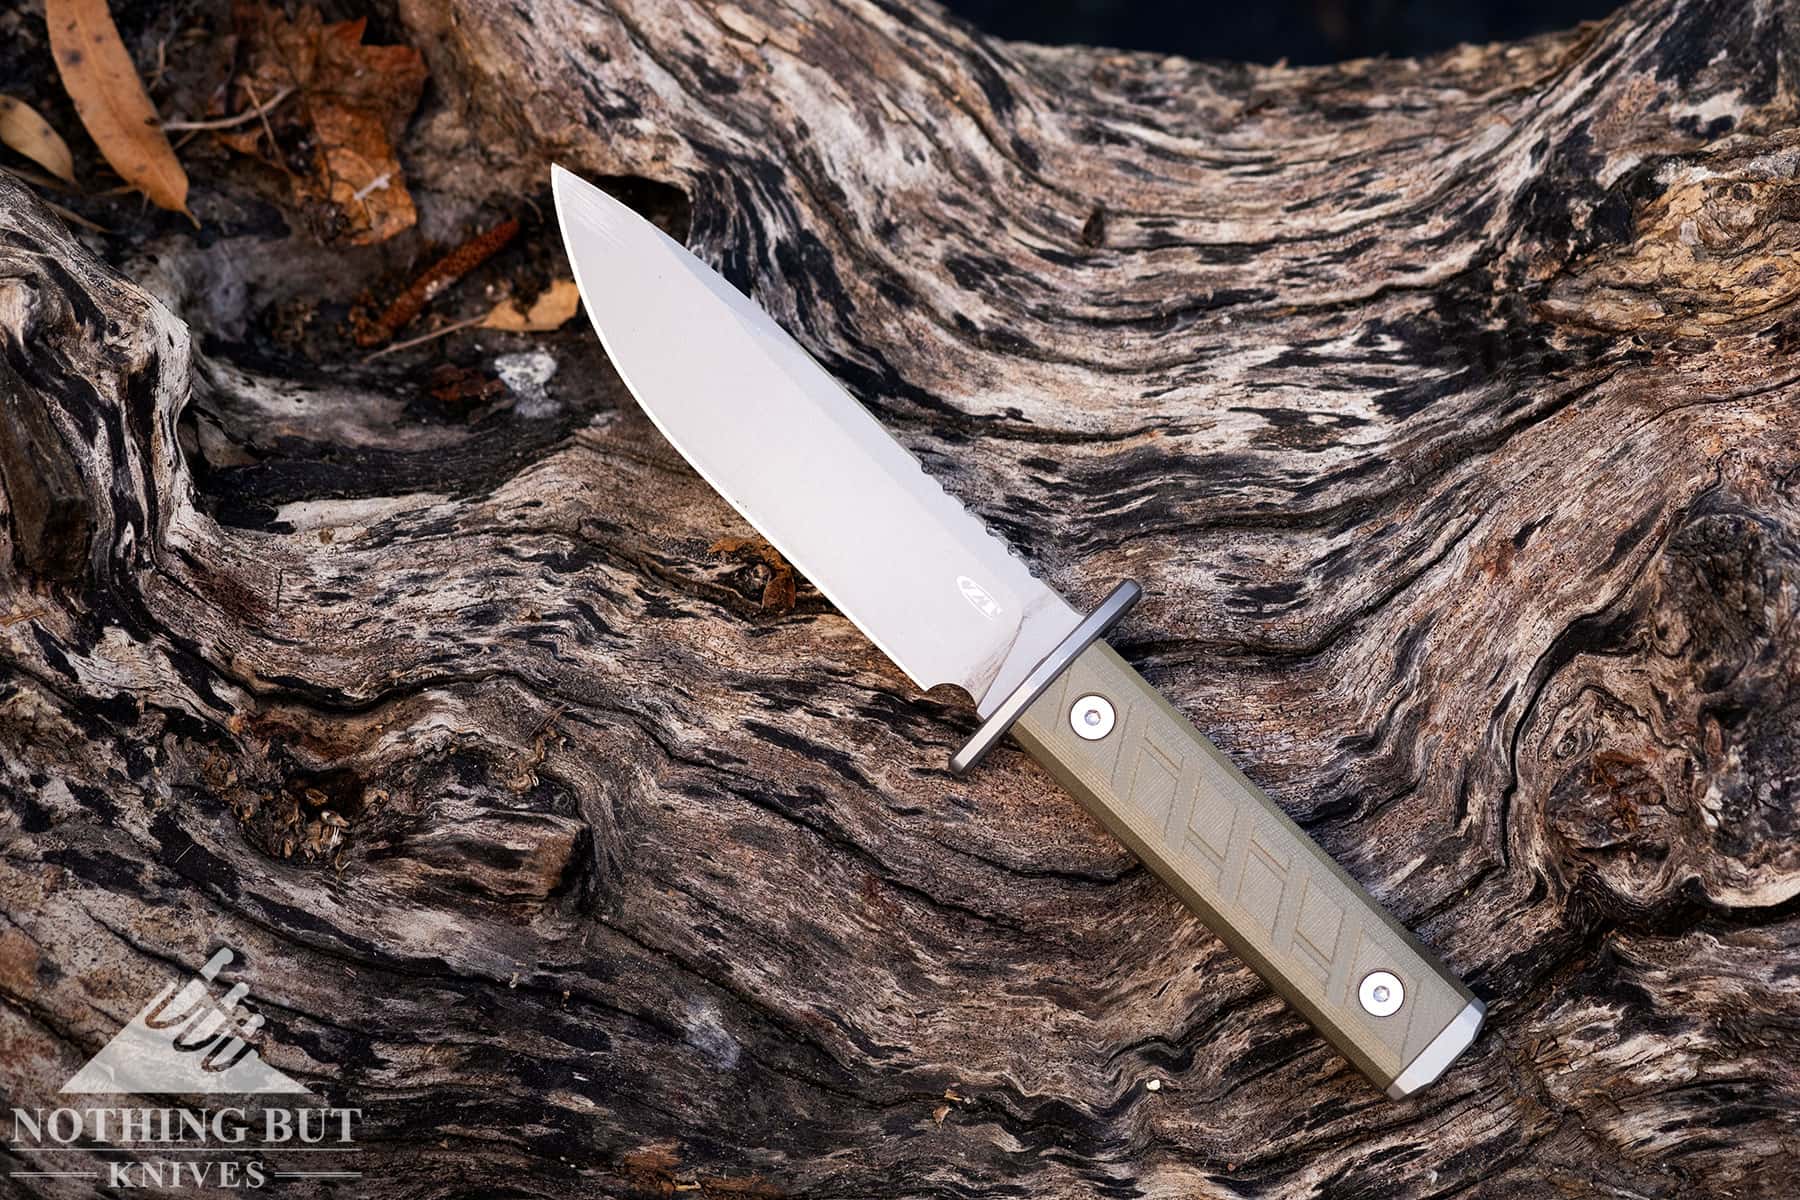 The Zero Tolerance 0006 fixed blade knife sitting on weathered wood outdoors.